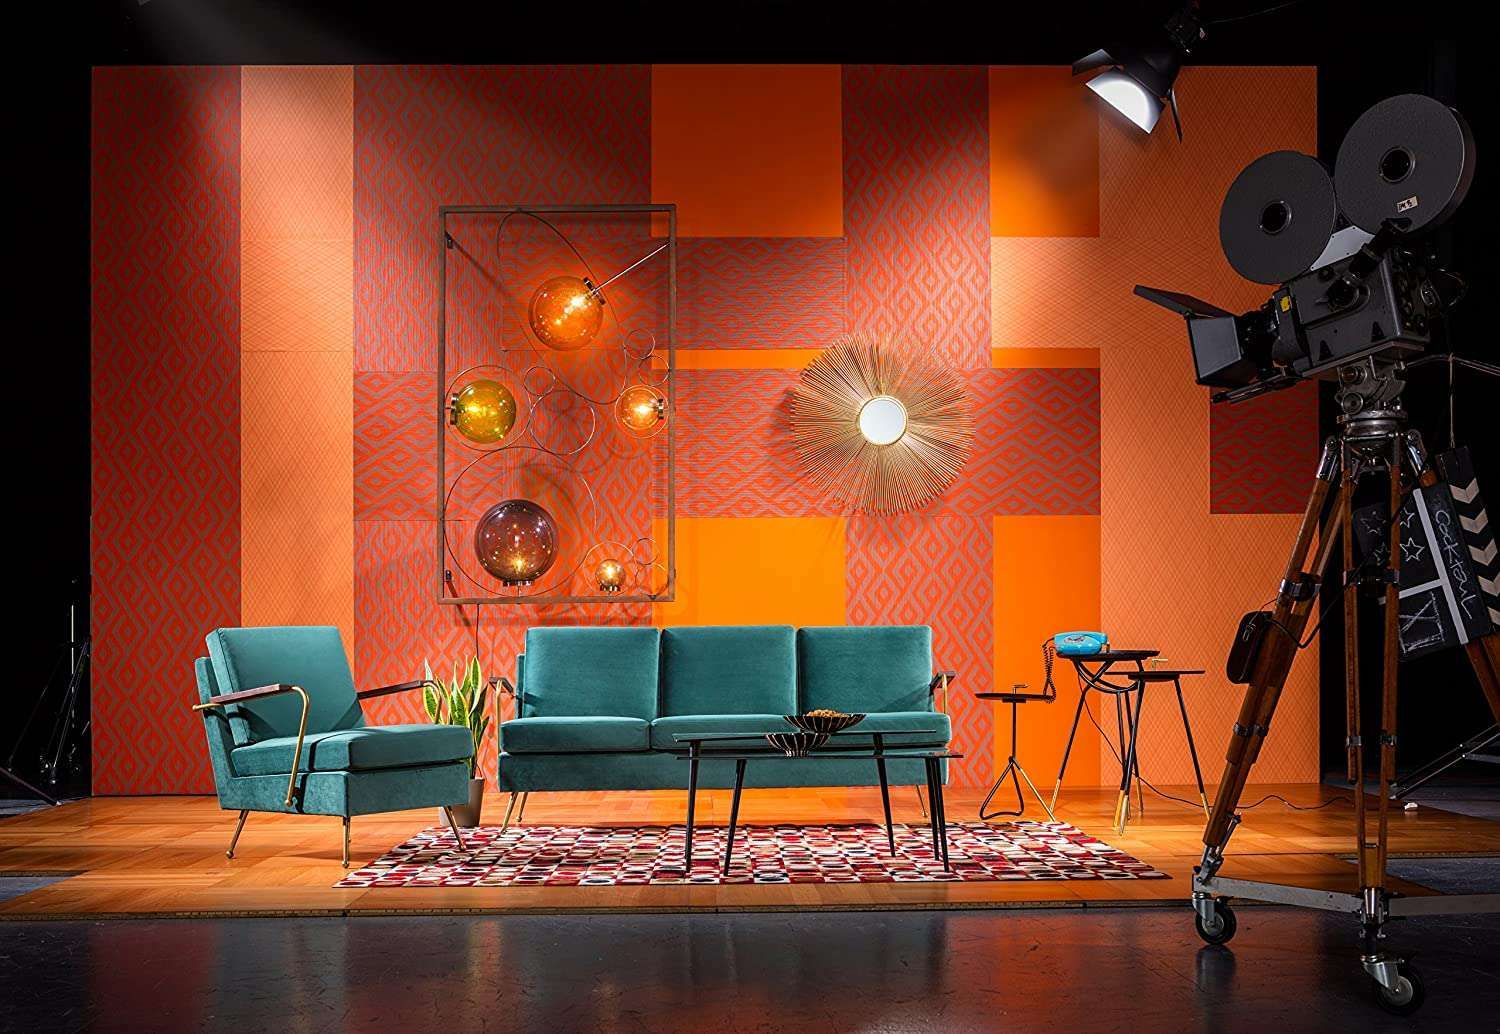 Mirrors Press profile homify Livings modernos: Ideas, imágenes y decoración Furniture, Couch, Stage is empty, Orange, Chair, Interior design, Entertainment, Tripod, Table, Performing arts